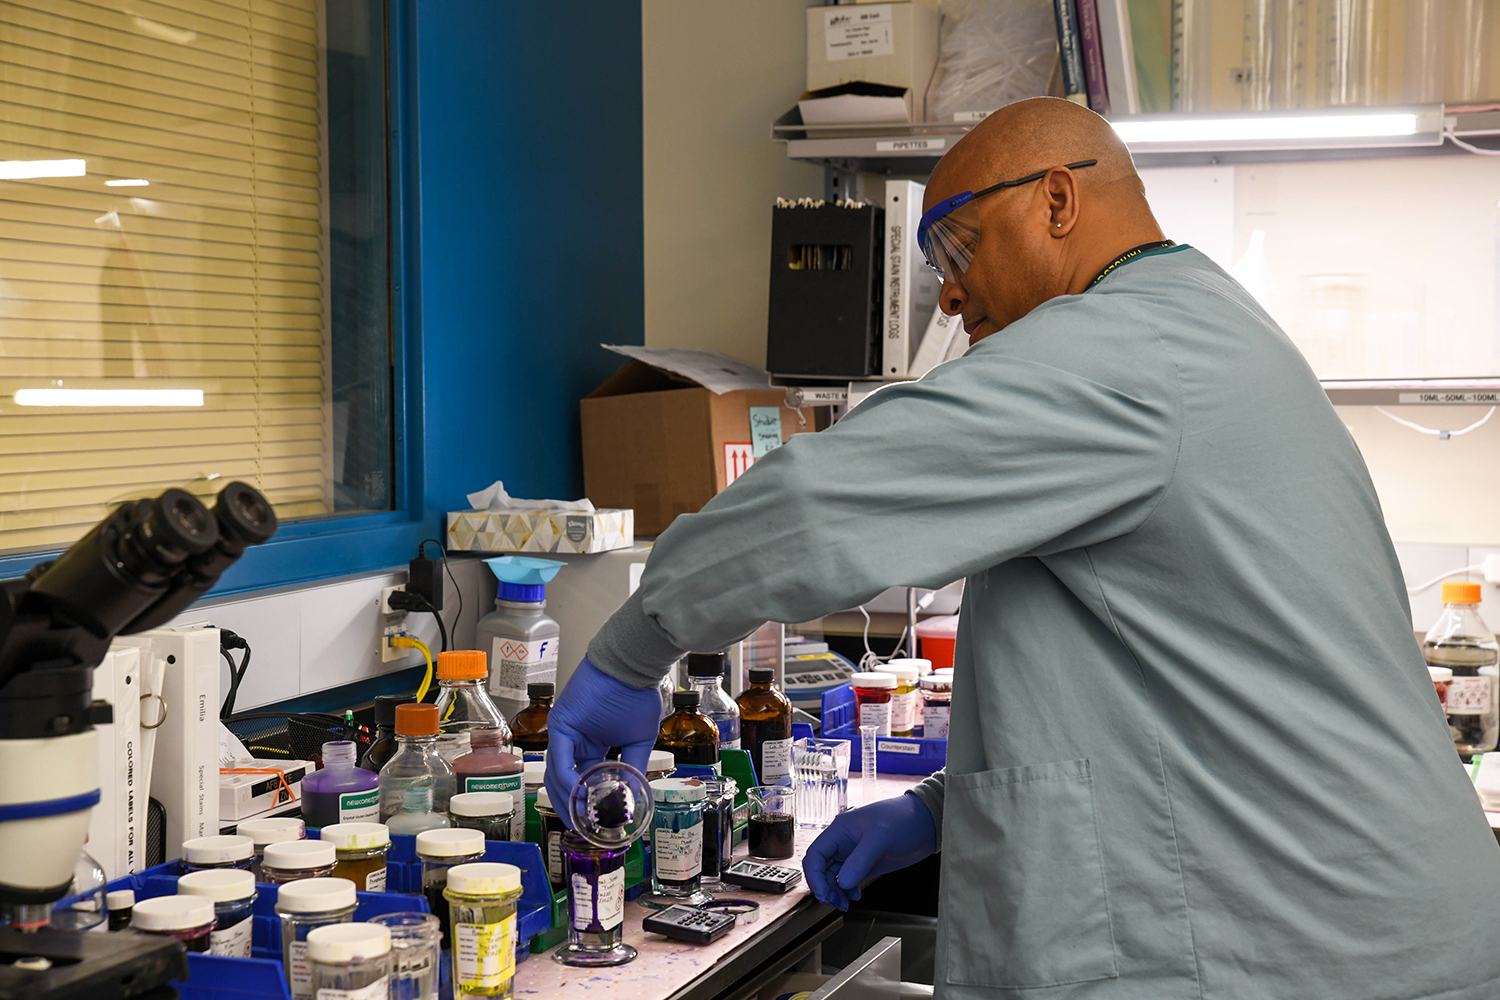 Rodney Barber mixes stains which will be used to identify antibody markers on patient slides.